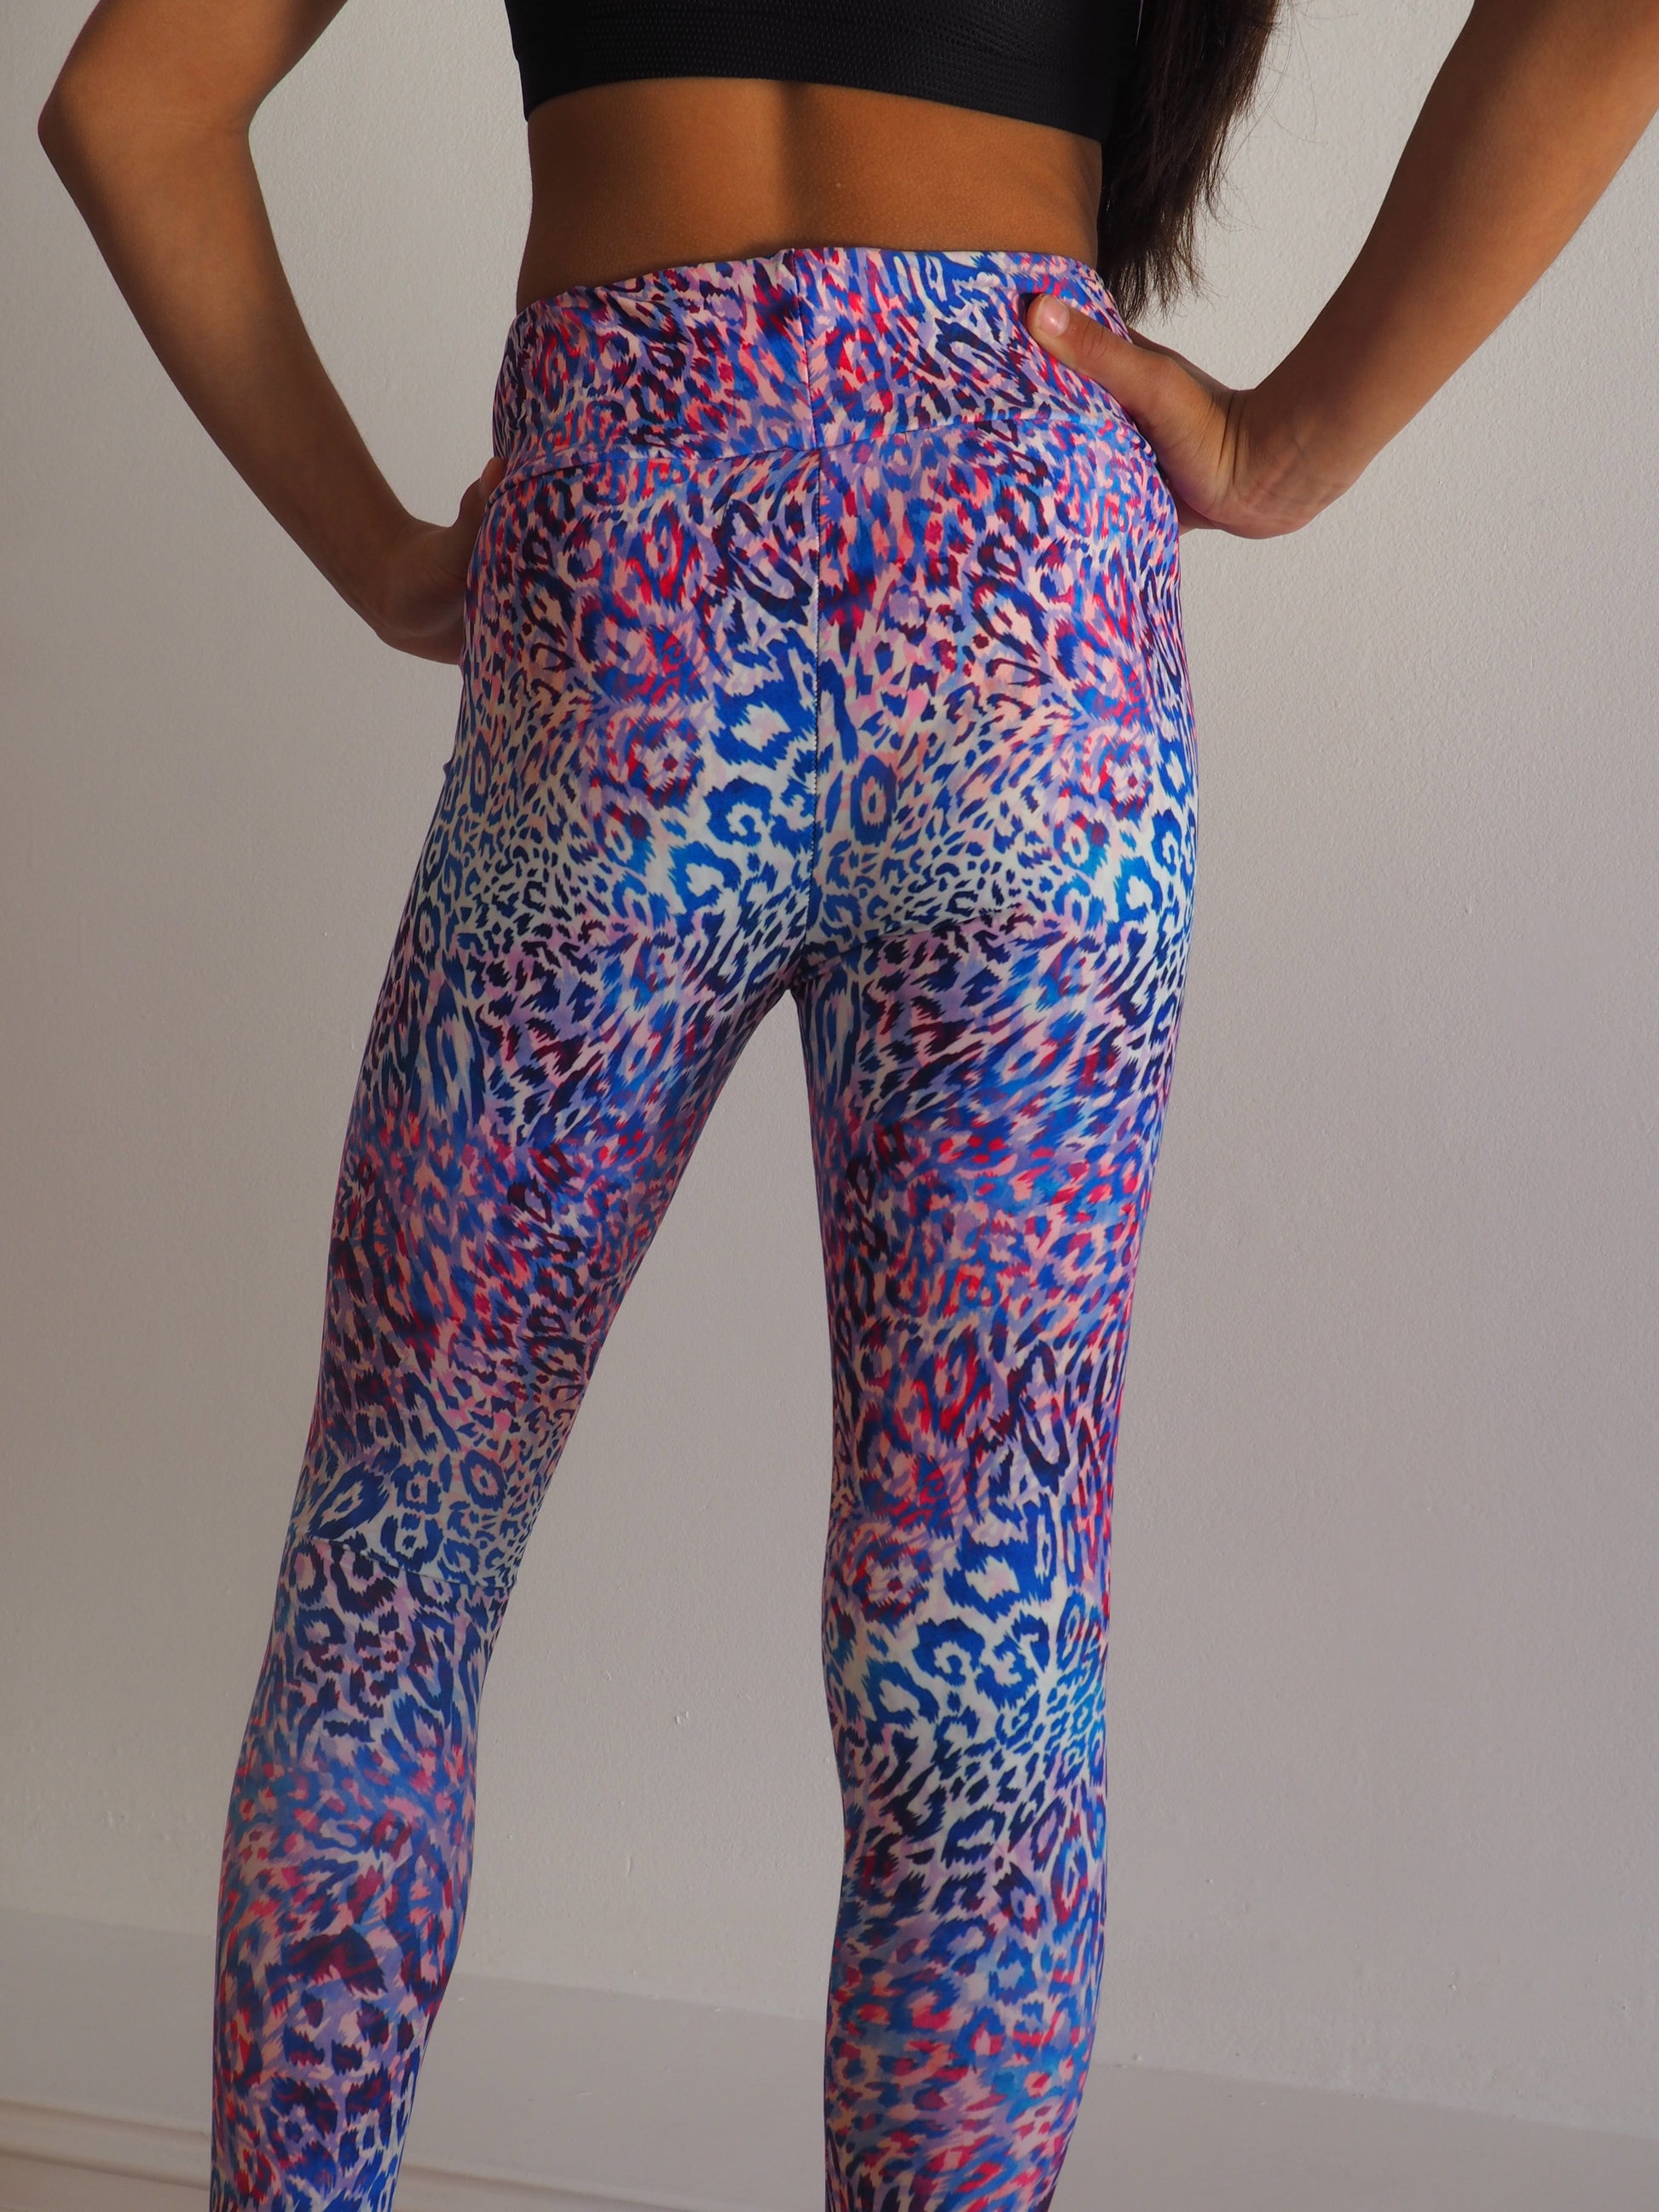  NEON BLUE AND PINK  LEOPARD PRINT  TWEENS COMPRESSION TIGHTS - GERRY CAN 